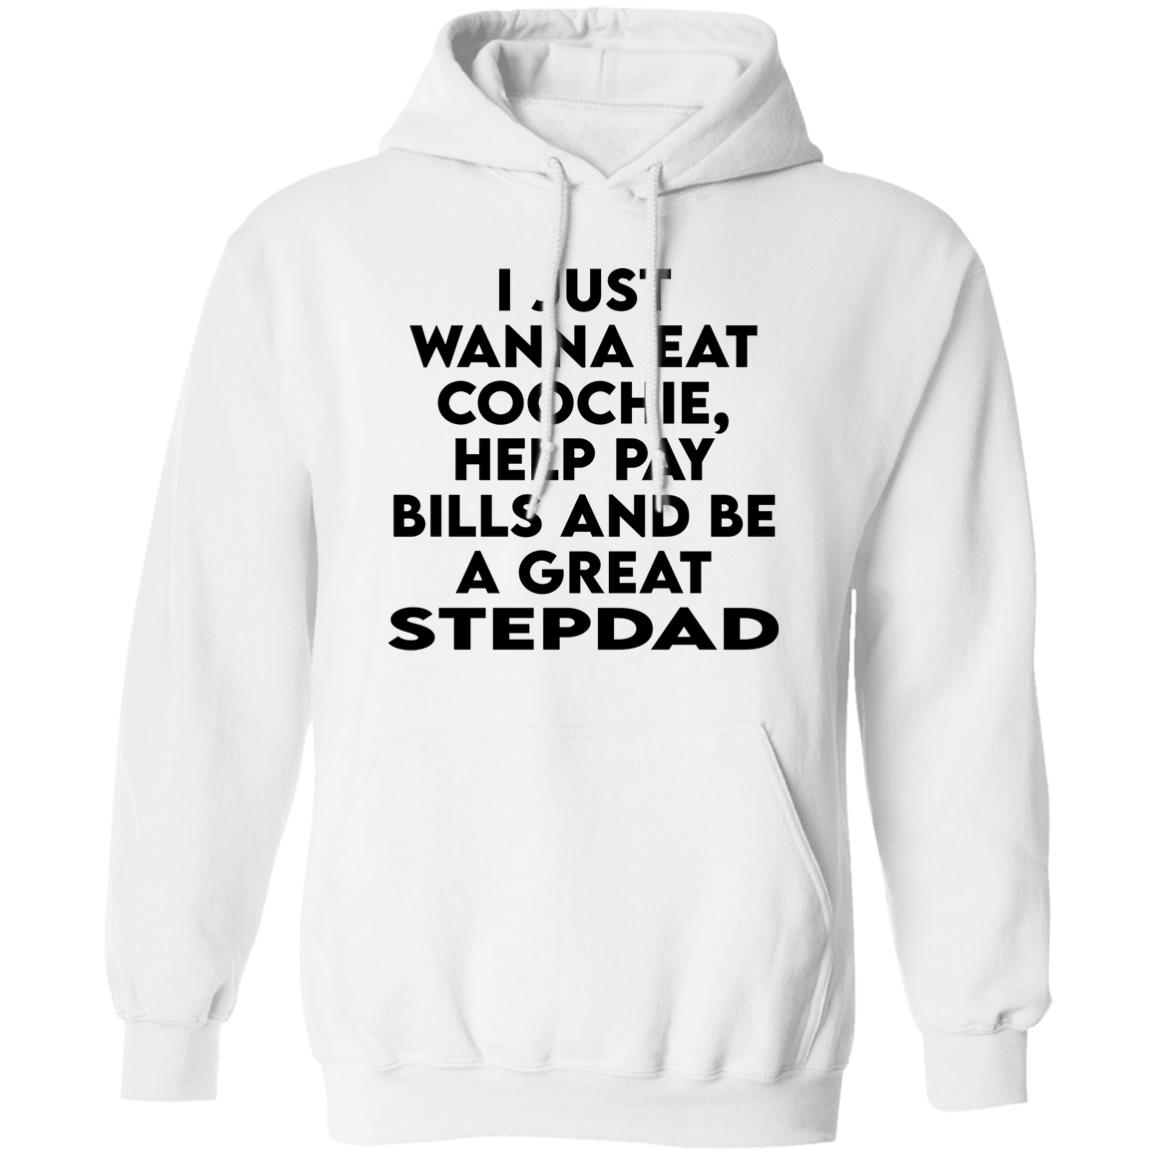 I Just Wanna Eat Coochie Help Pay Bills And Be A Great Stepdad Shirt 23